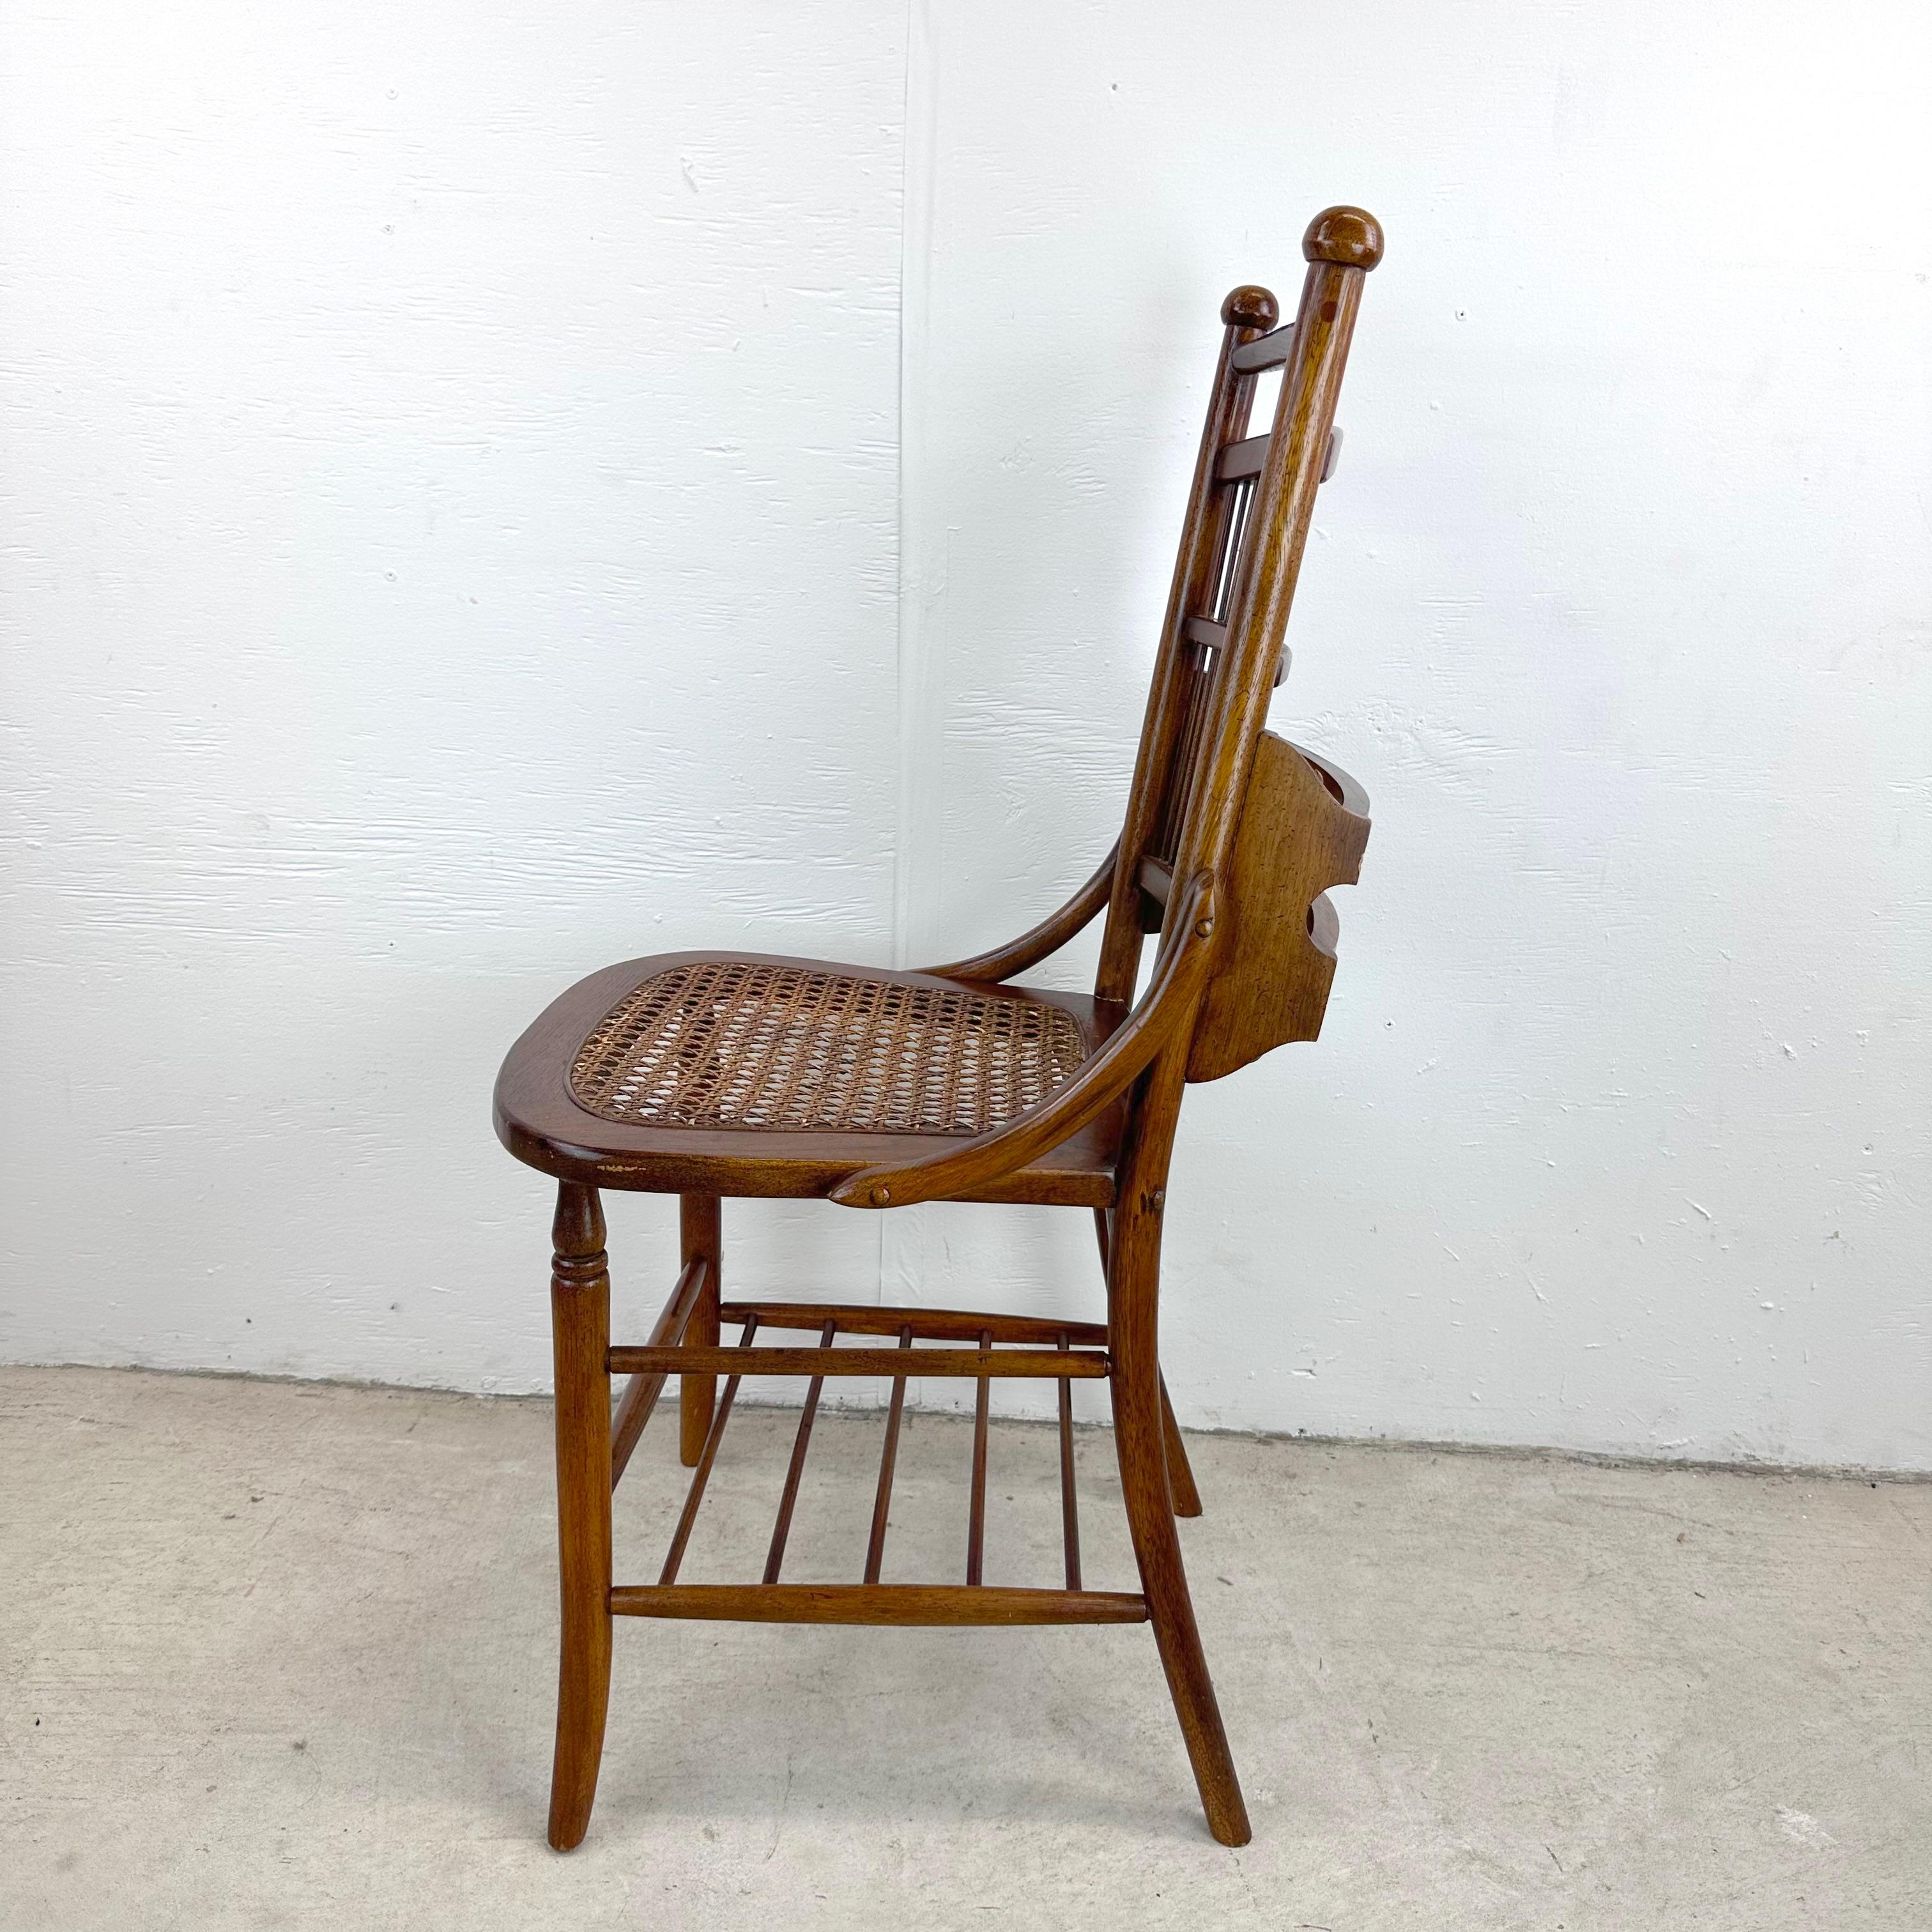 Antique Side Chair With Cane Seat and Spindle Back For Sale 1